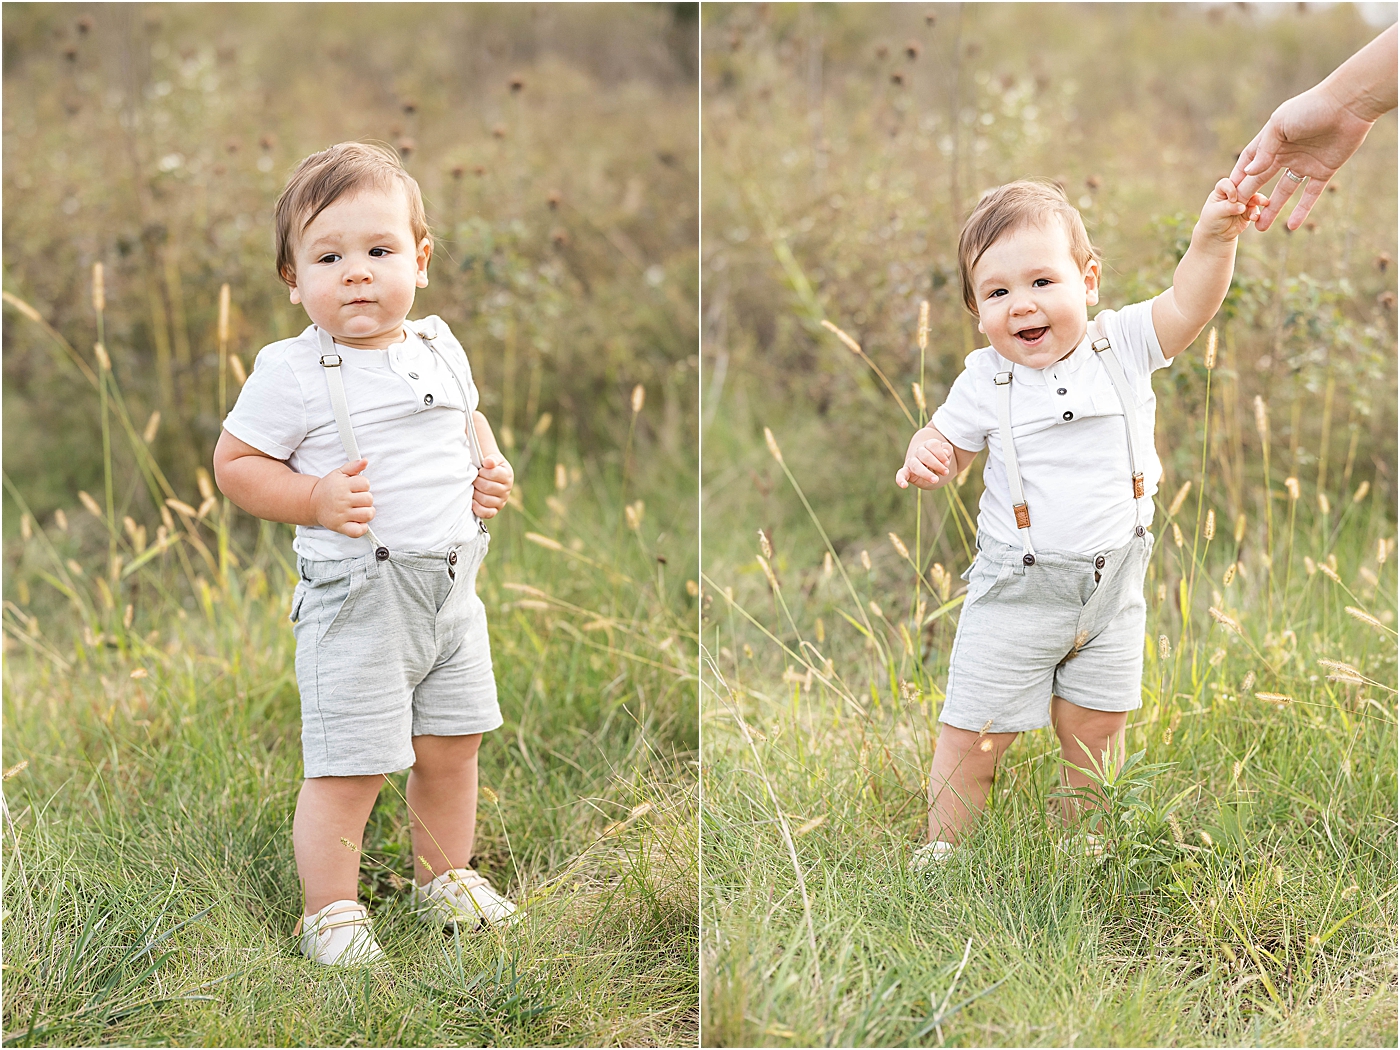 First birthday photoshoot for one year old little boy with Geist Family Photographer, Lindsay Konopa Photography.